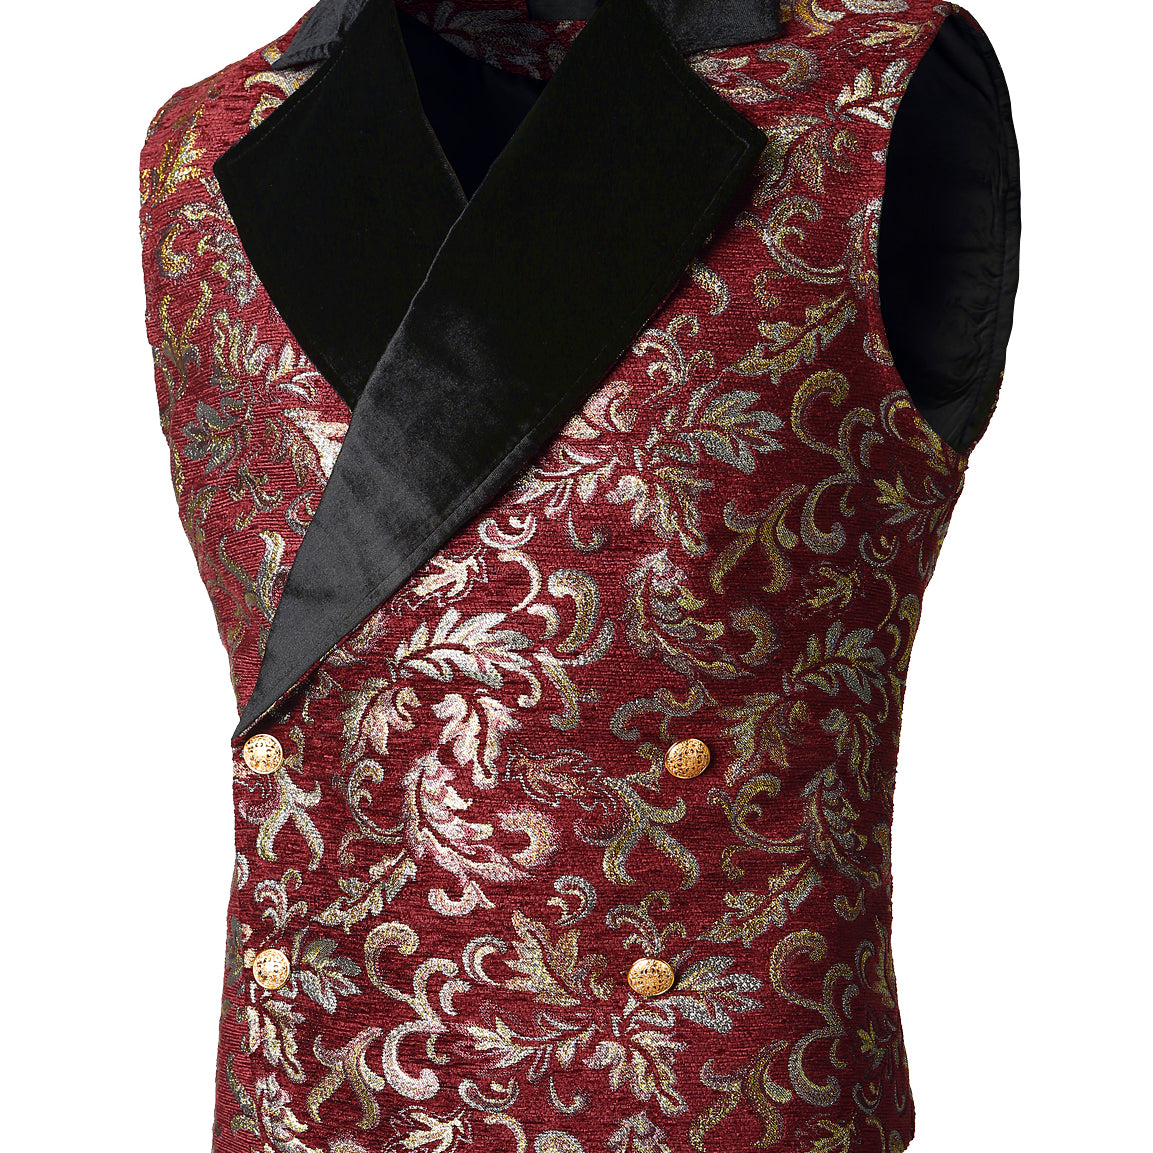 Men's Victorian Double Breasted Vest Floral Paisley Gothic Steampunk Red Waistcoat